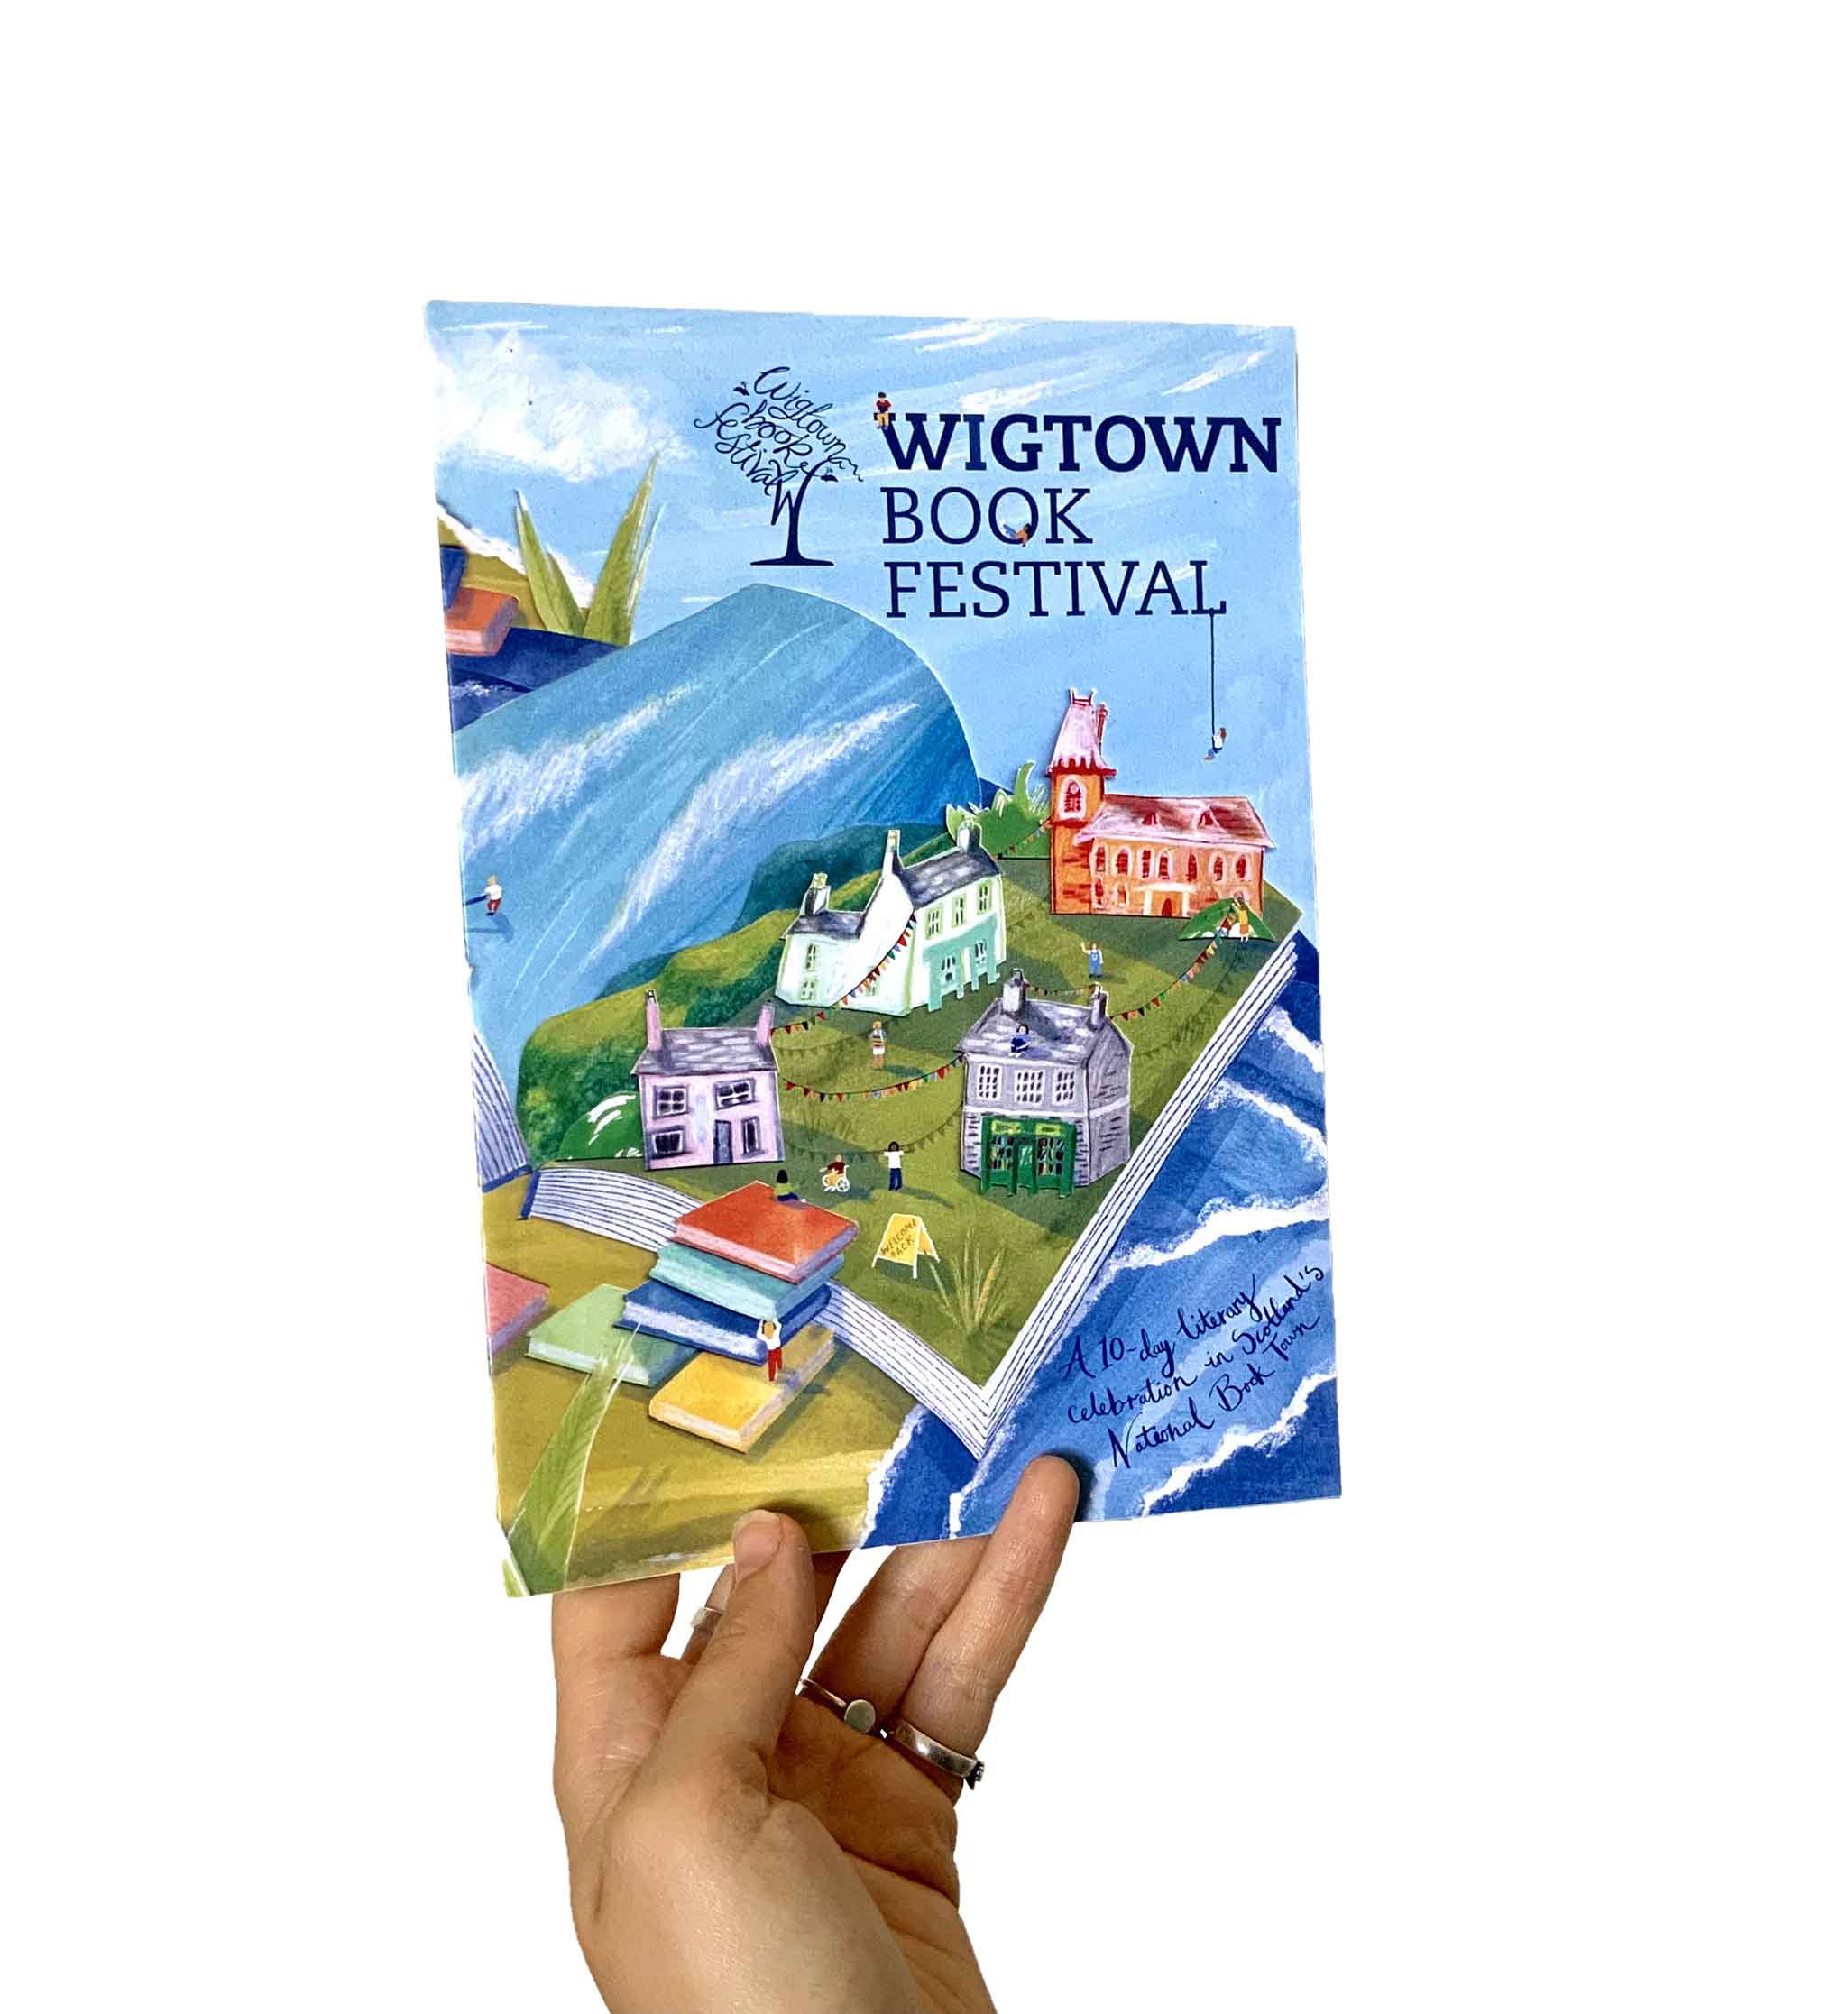 A hand holds up the cover of a book with the title 'Wigtown Book Festival'. The scene is green and blue and features a large open book with small houses. 